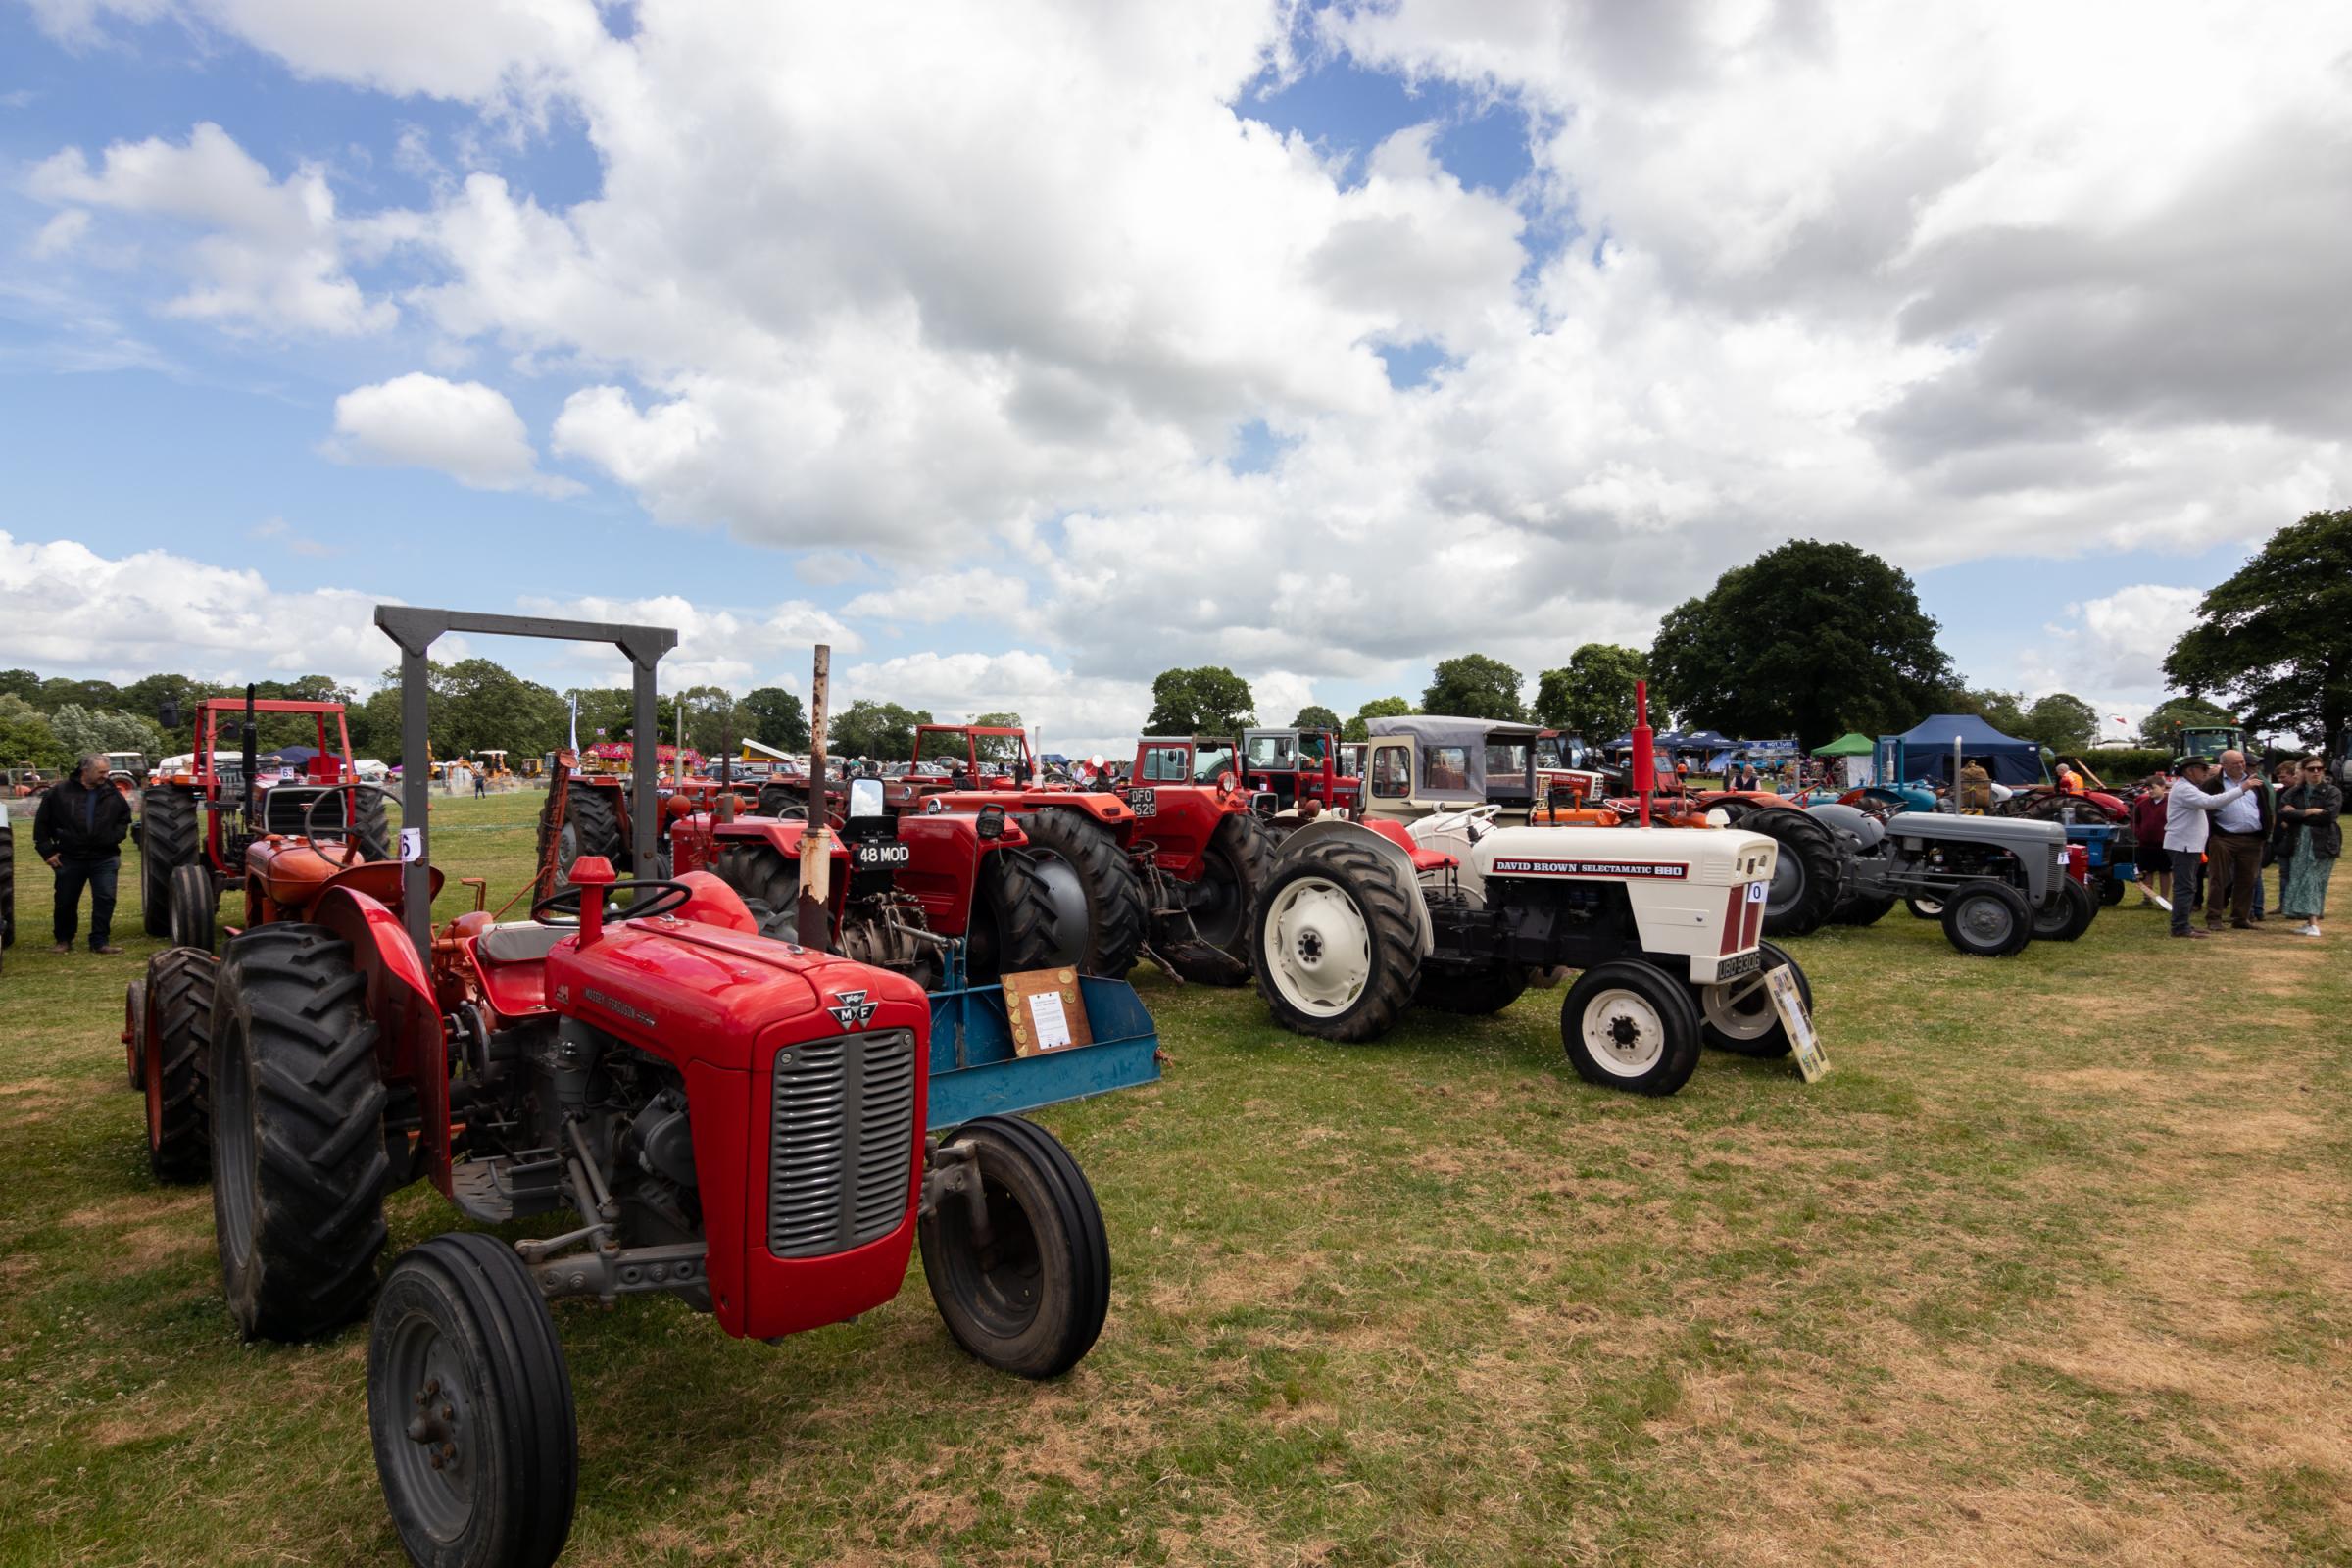 Iconic Massey Ferguson tractors were also at Bromyard Gala 2022 for revellers to look at. Picture: Sofie Smith